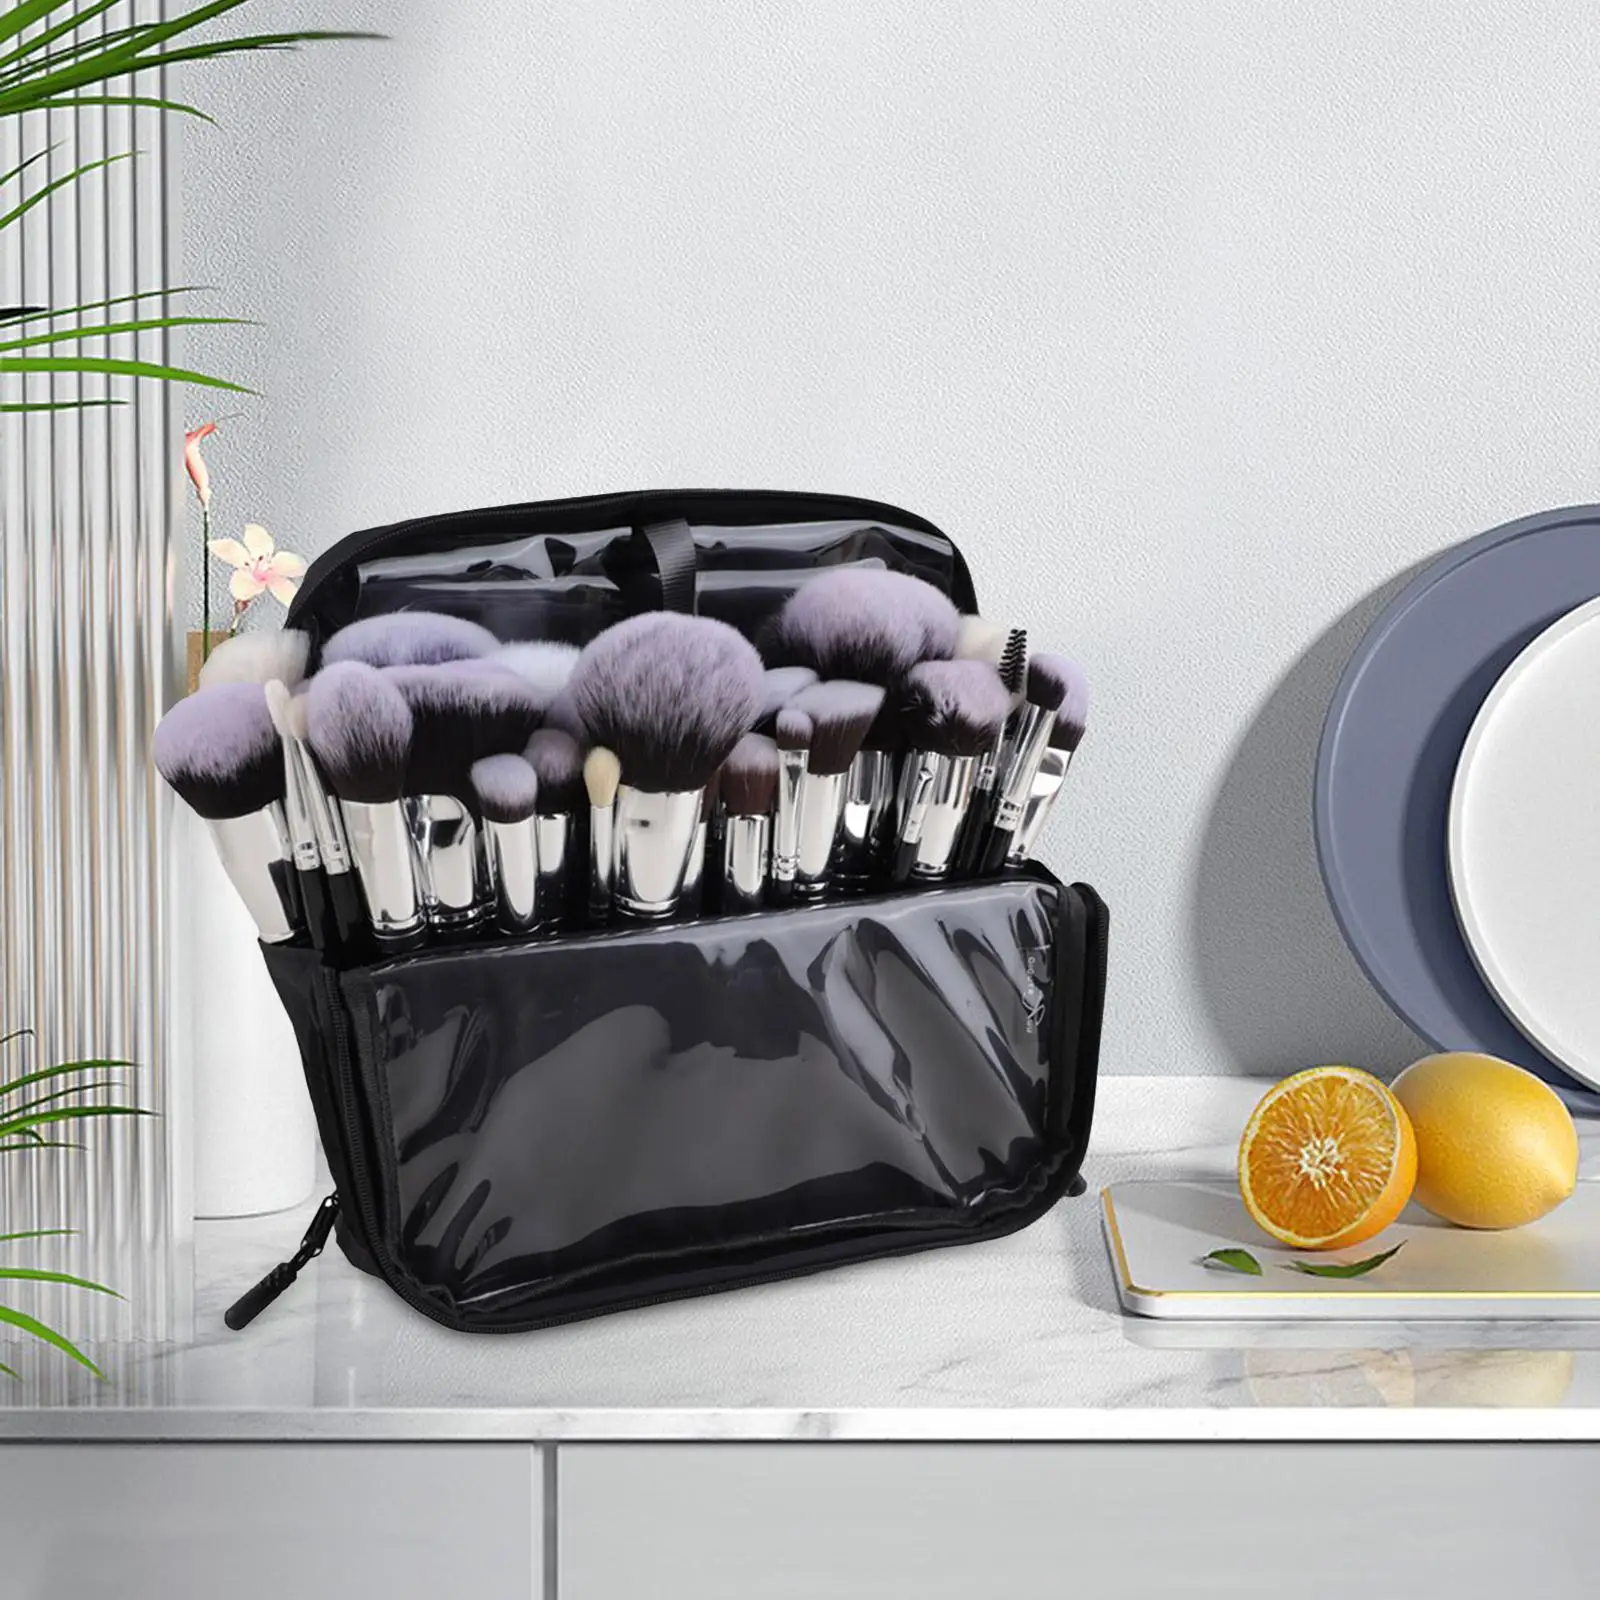 Makeup Brush Organzier Bag Foldable Stand up Durable Zipper Large Cosmetic Bag for Cleaning Brushes Makeup Artists